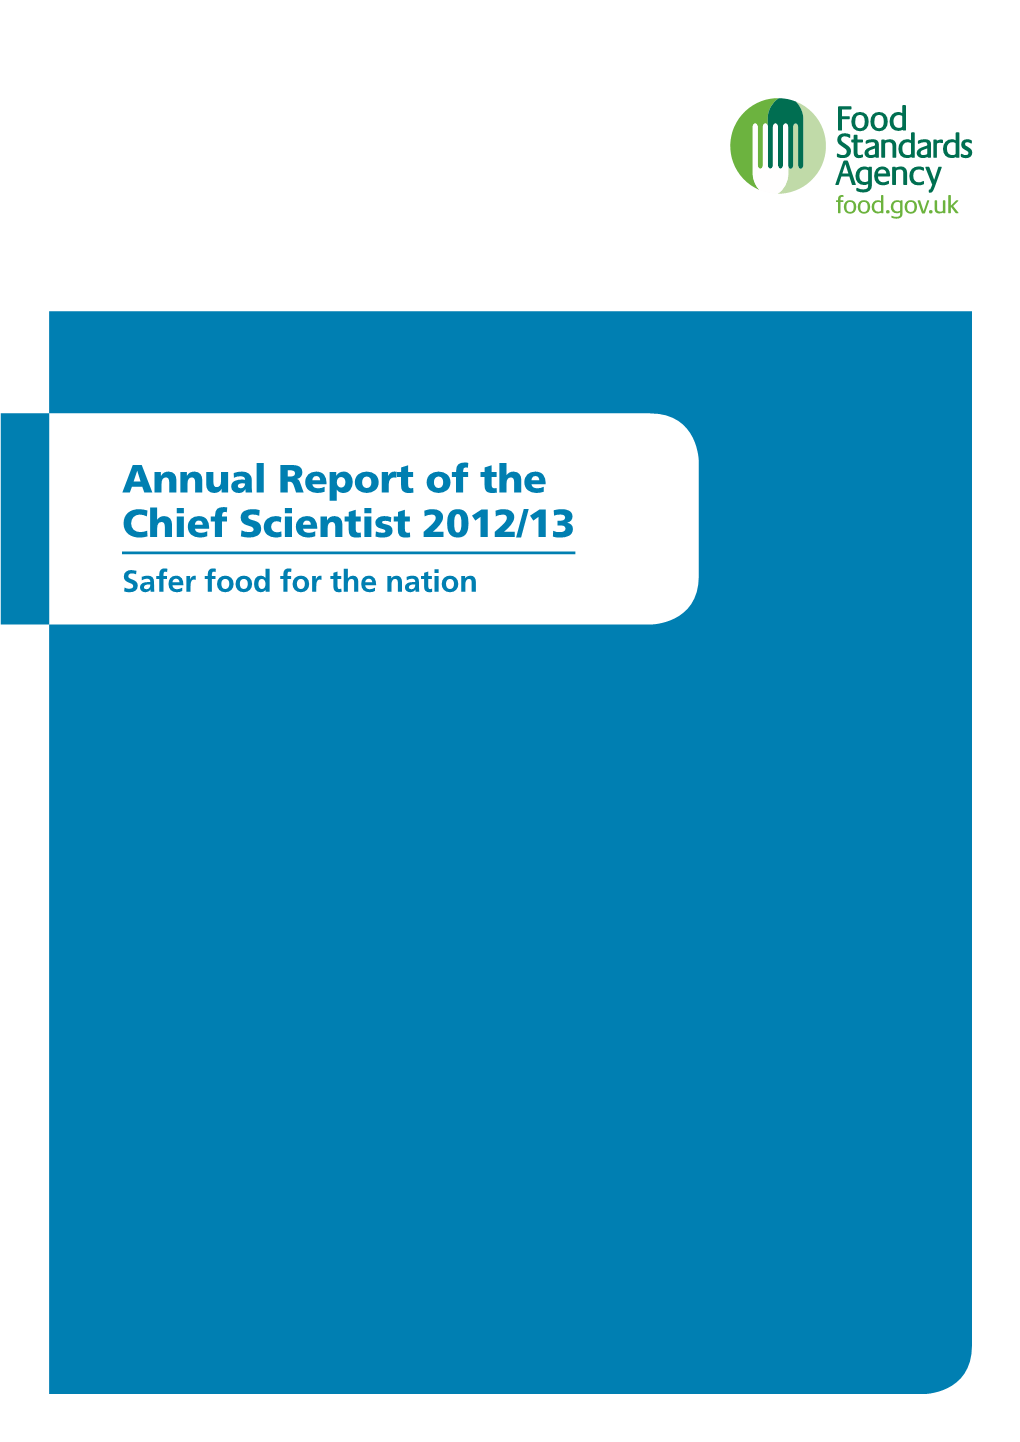 Annual Report of the Chief Scientist 2012/13 Safer Food for the Nation 1